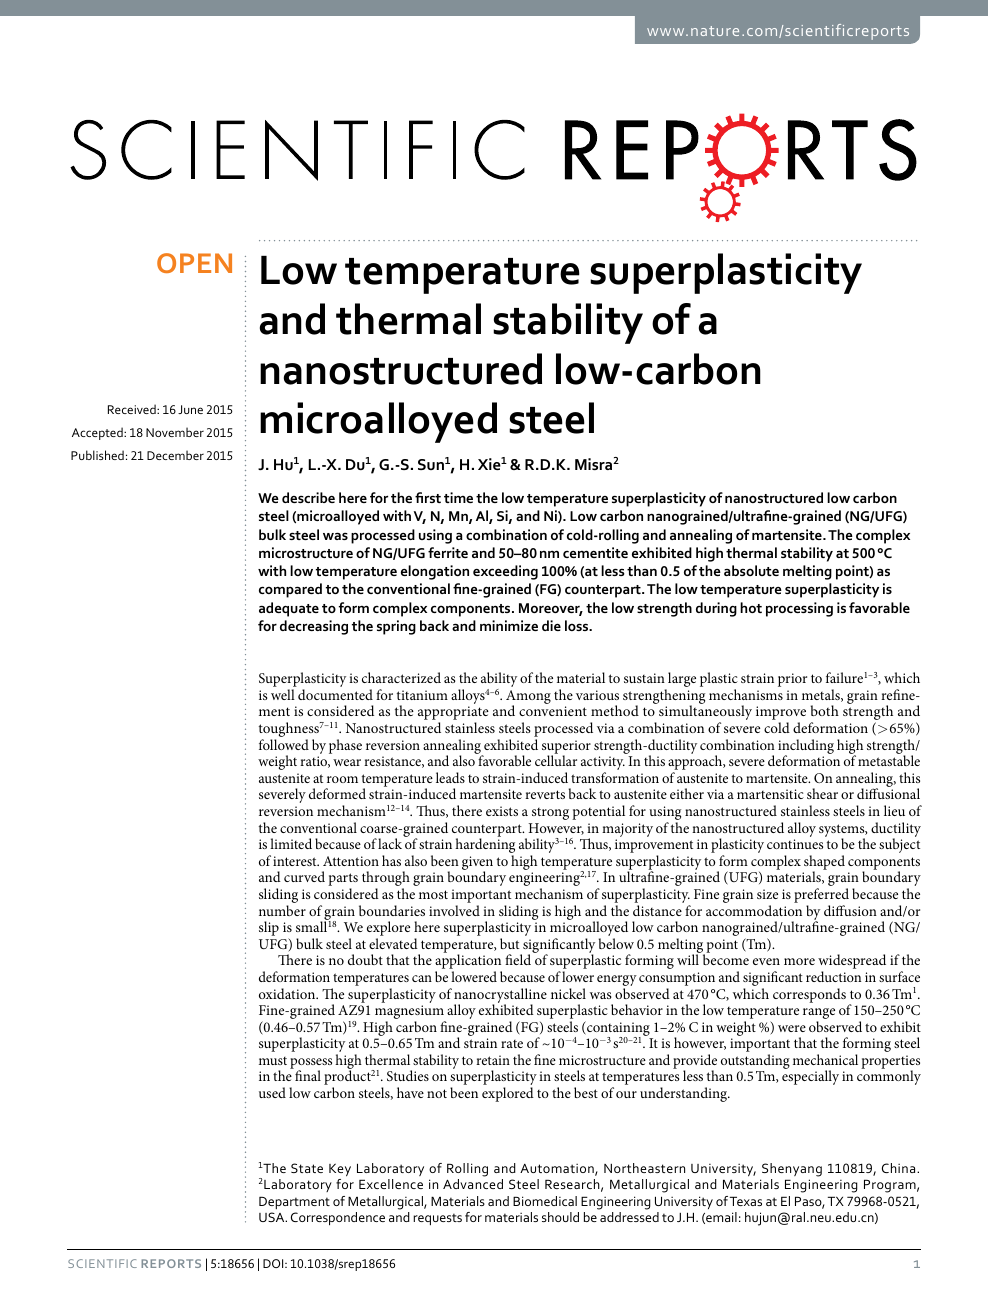 Low Temperature Superplasticity And Thermal Stability Of A Nanostructured Low Carbon Microalloyed Steel Topic Of Research Paper In Materials Engineering Download Scholarly Article Pdf And Read For Free On Cyberleninka Open Science